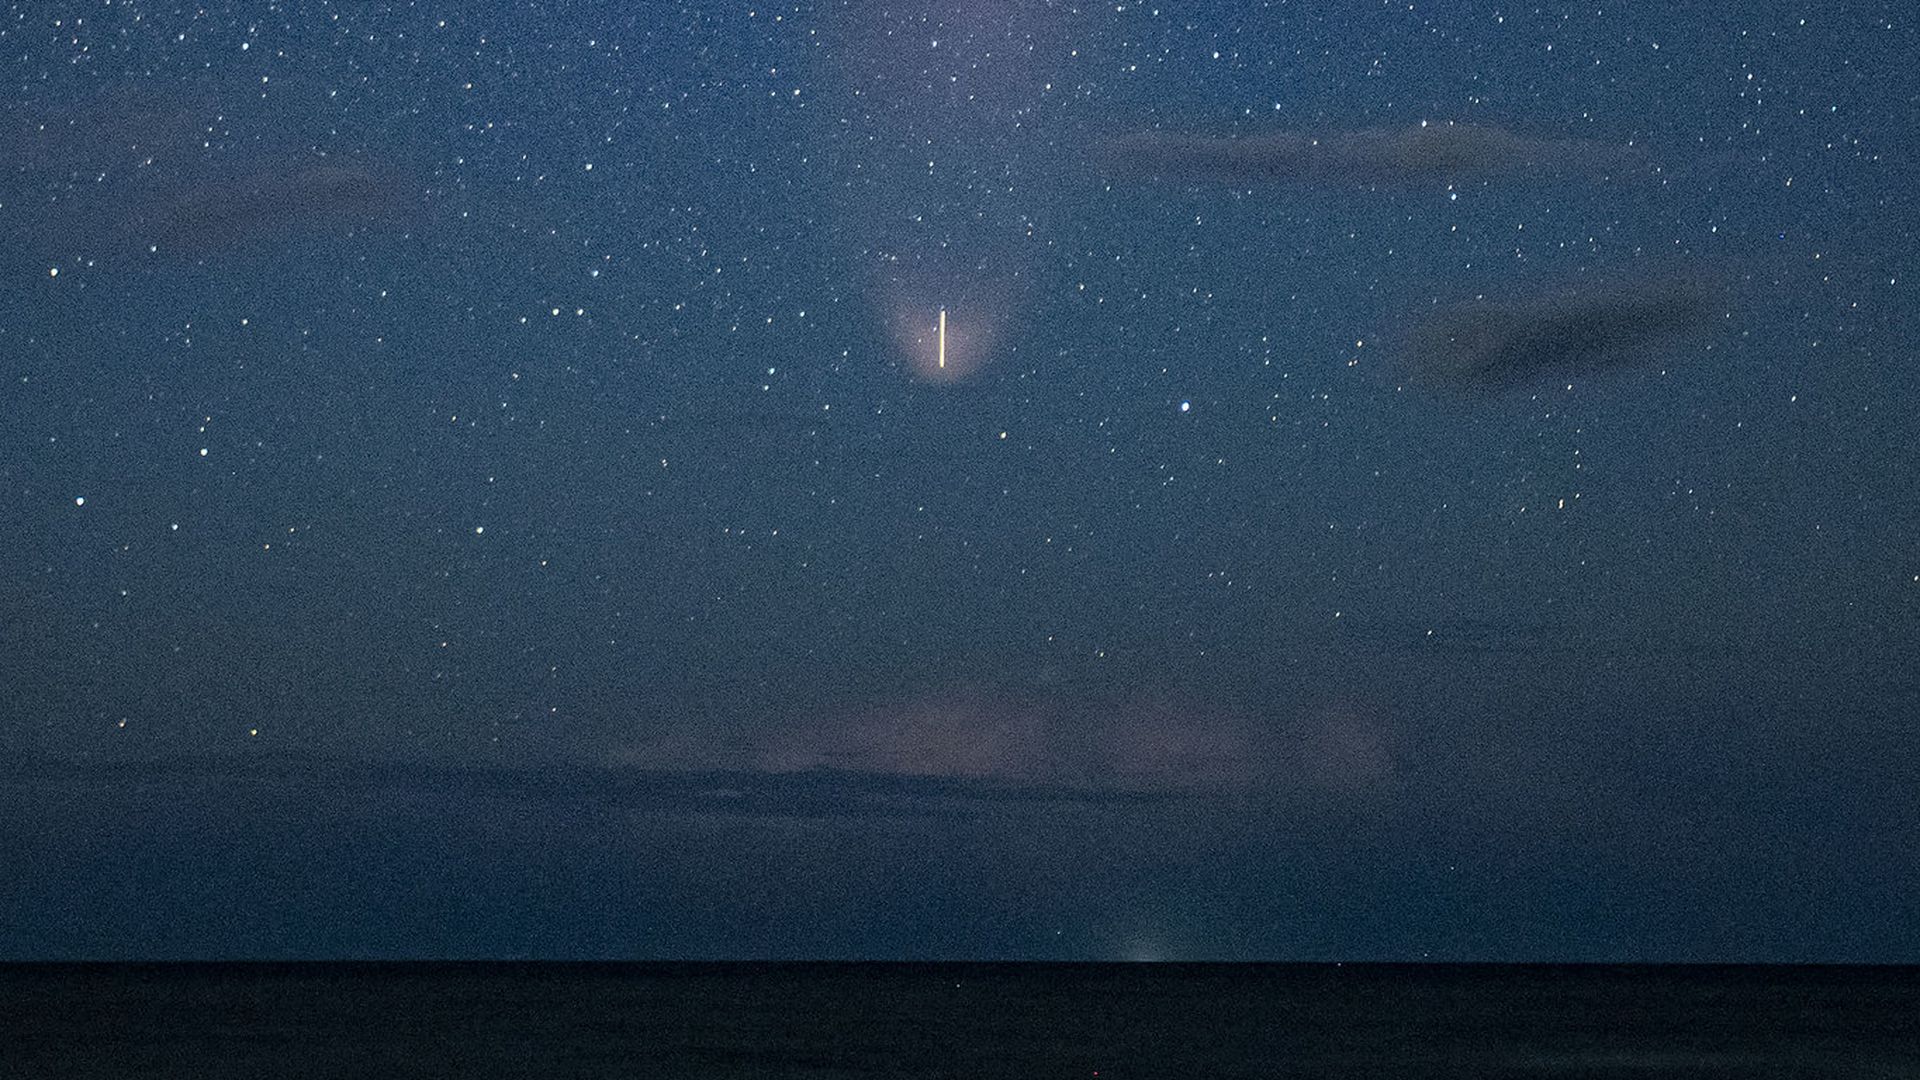 A Falcon 9 rocket in the late twilight.